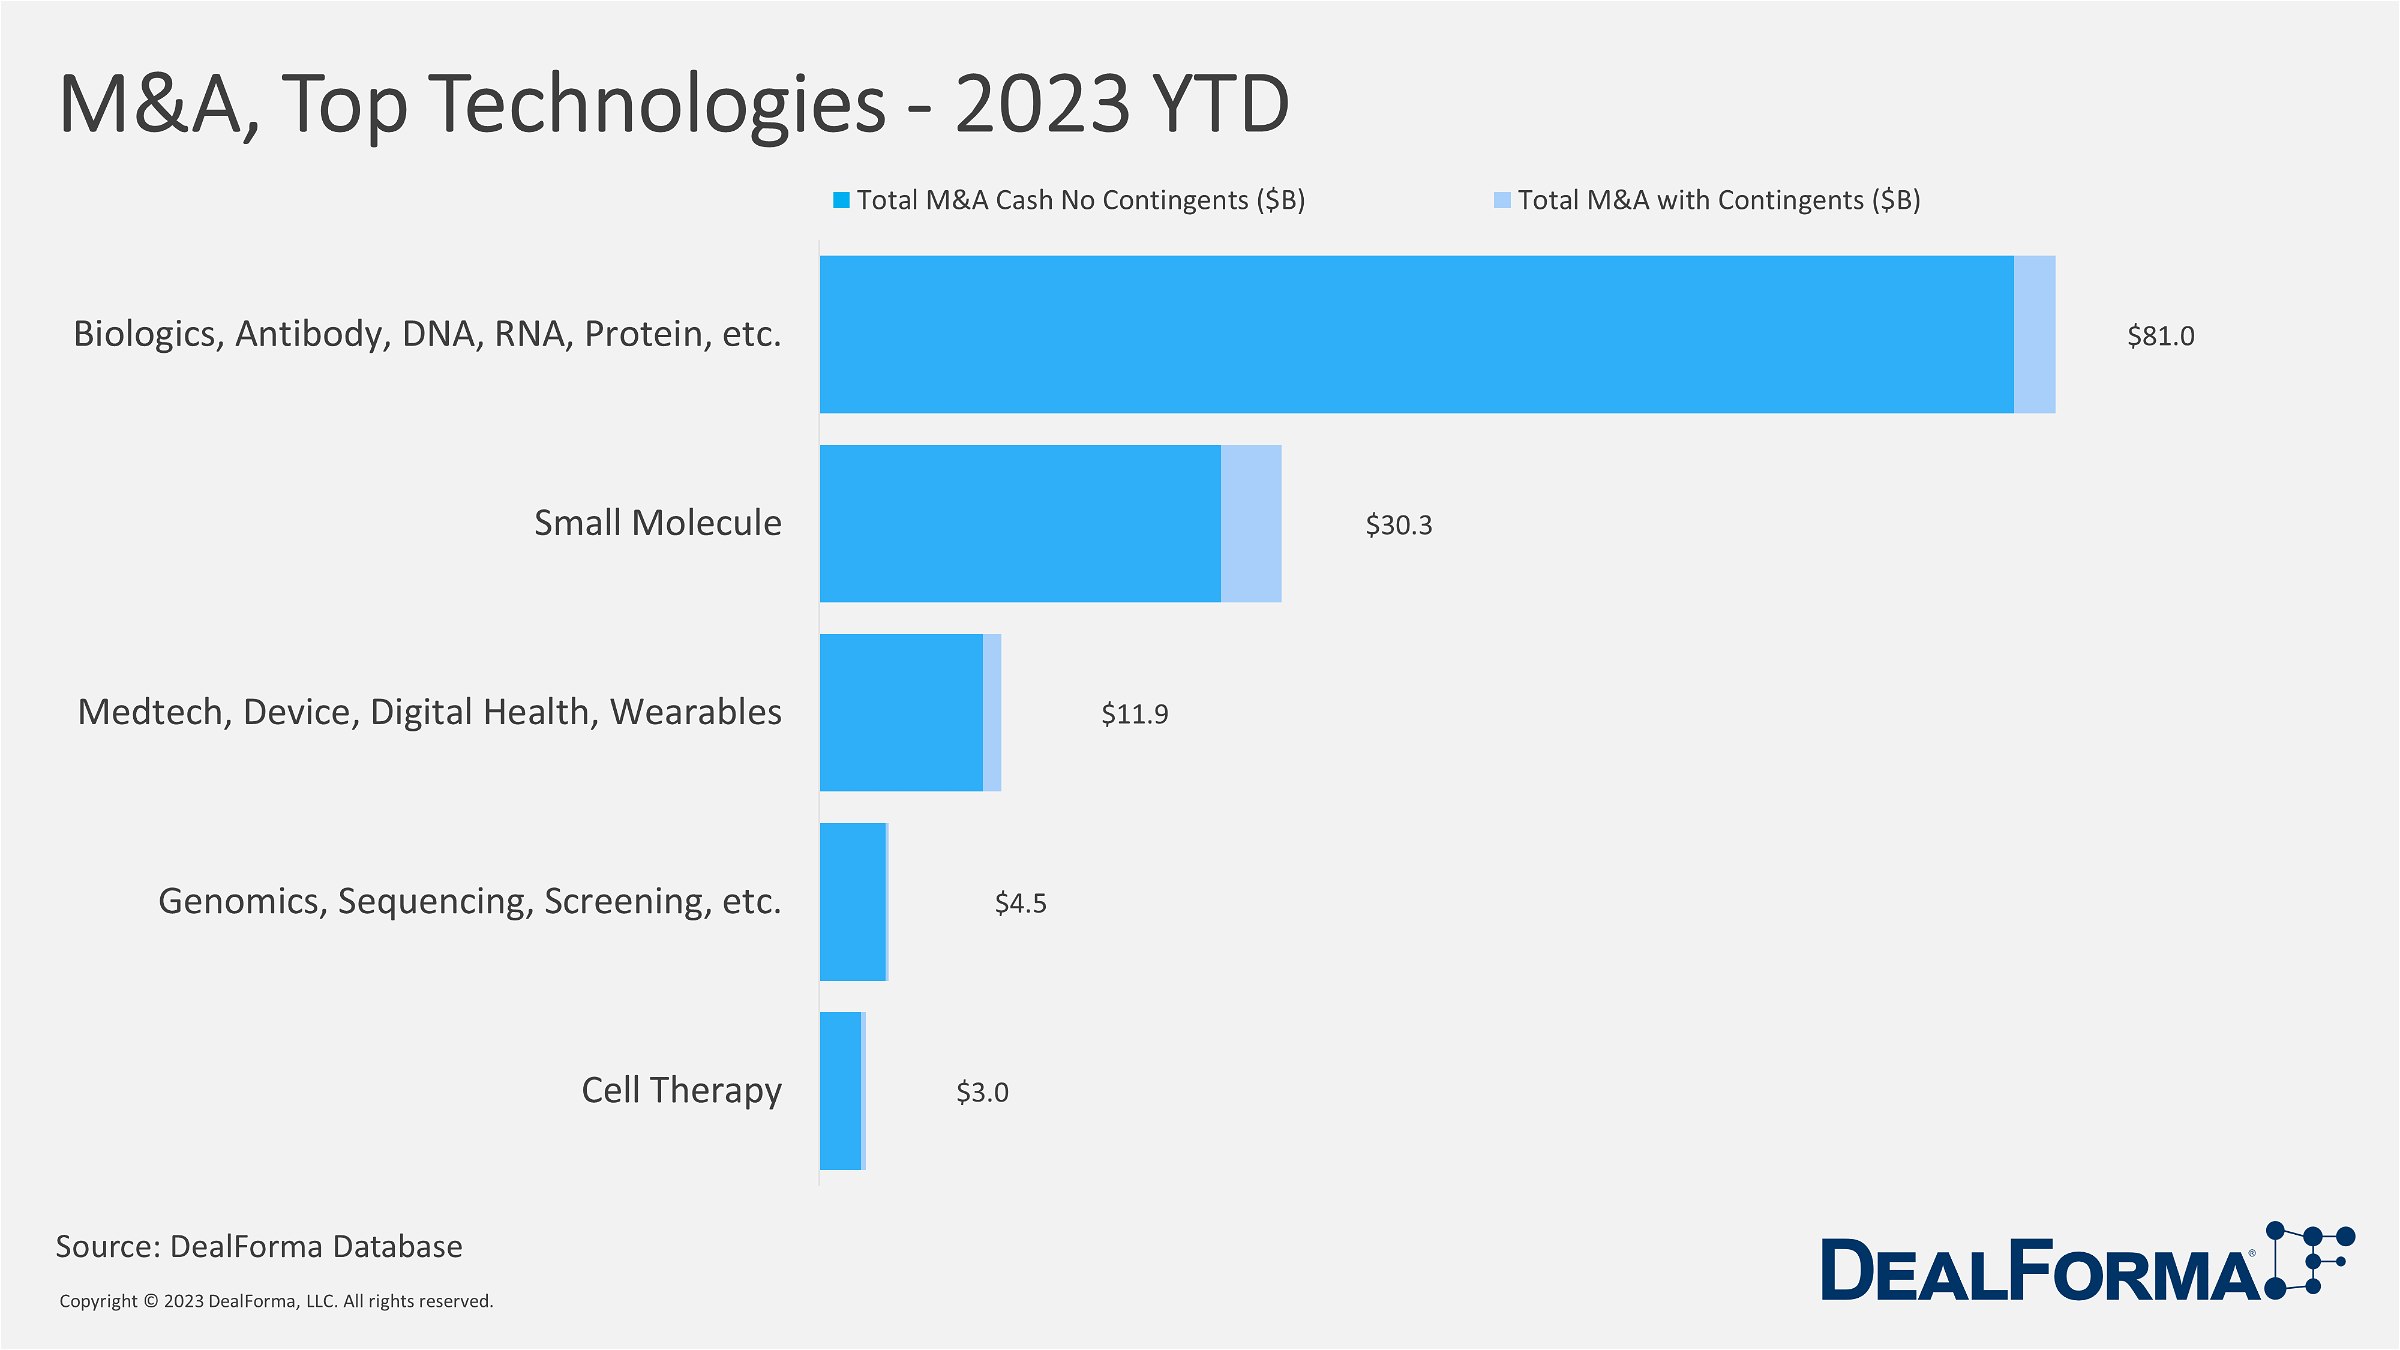 Top Technologies Across Biopharma and Medtech MA in 2023